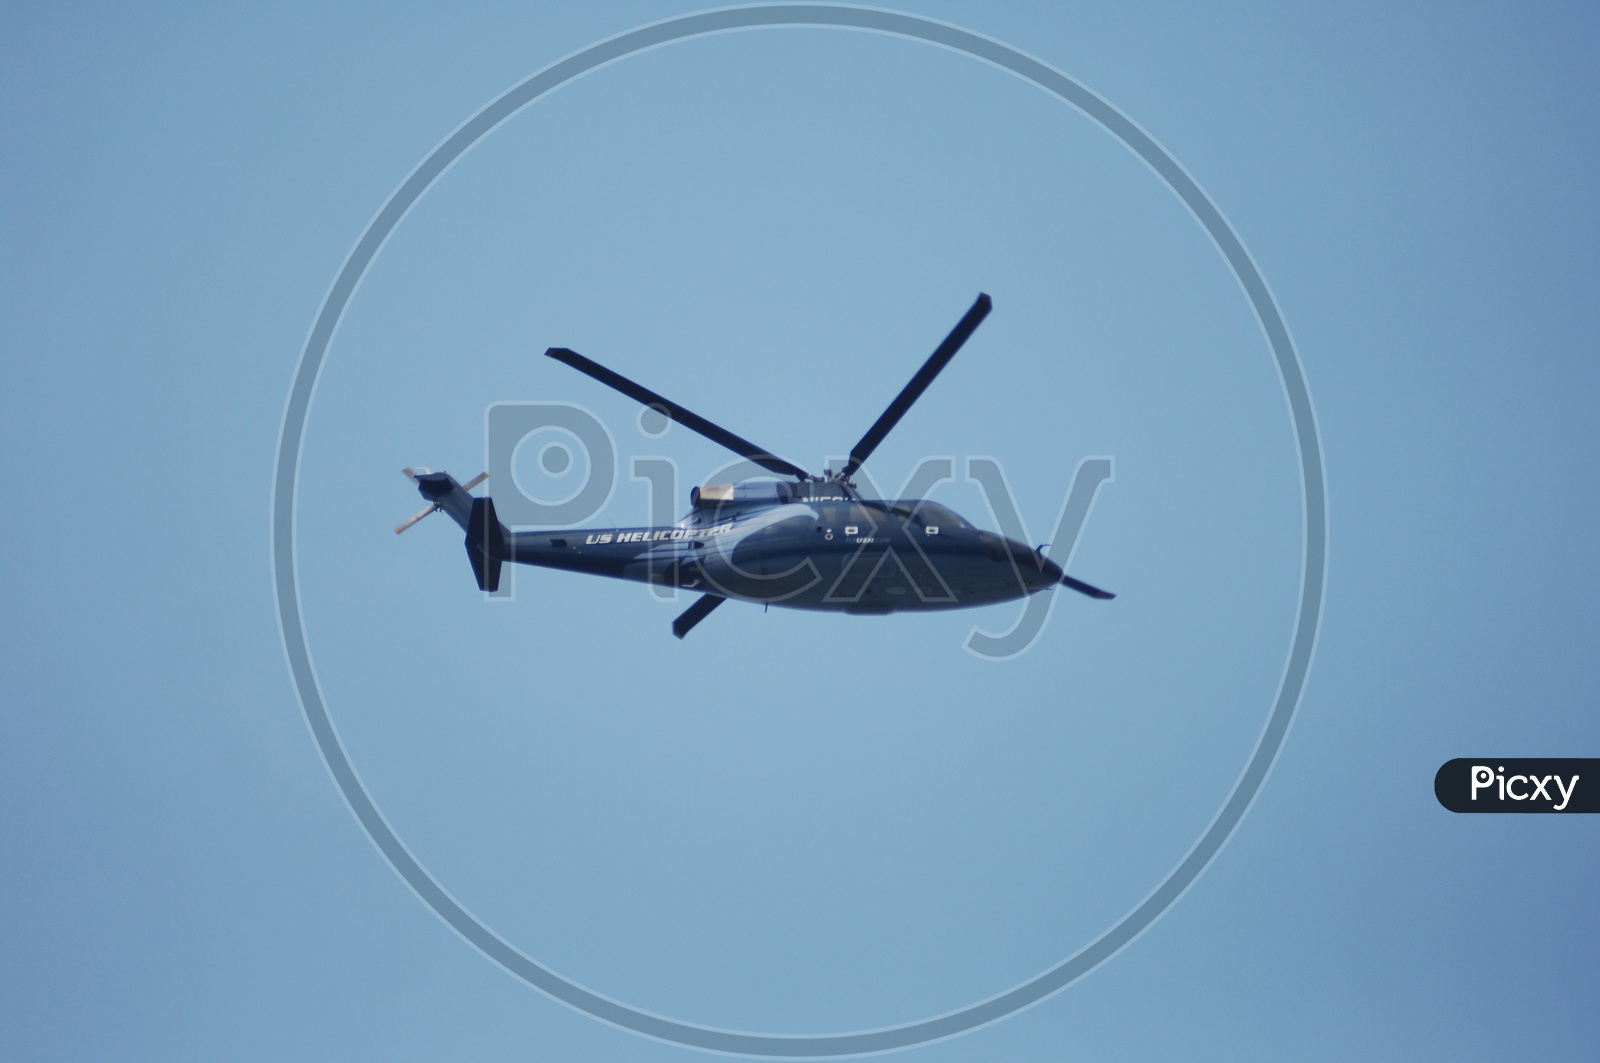 US Helicopter Flying in Air